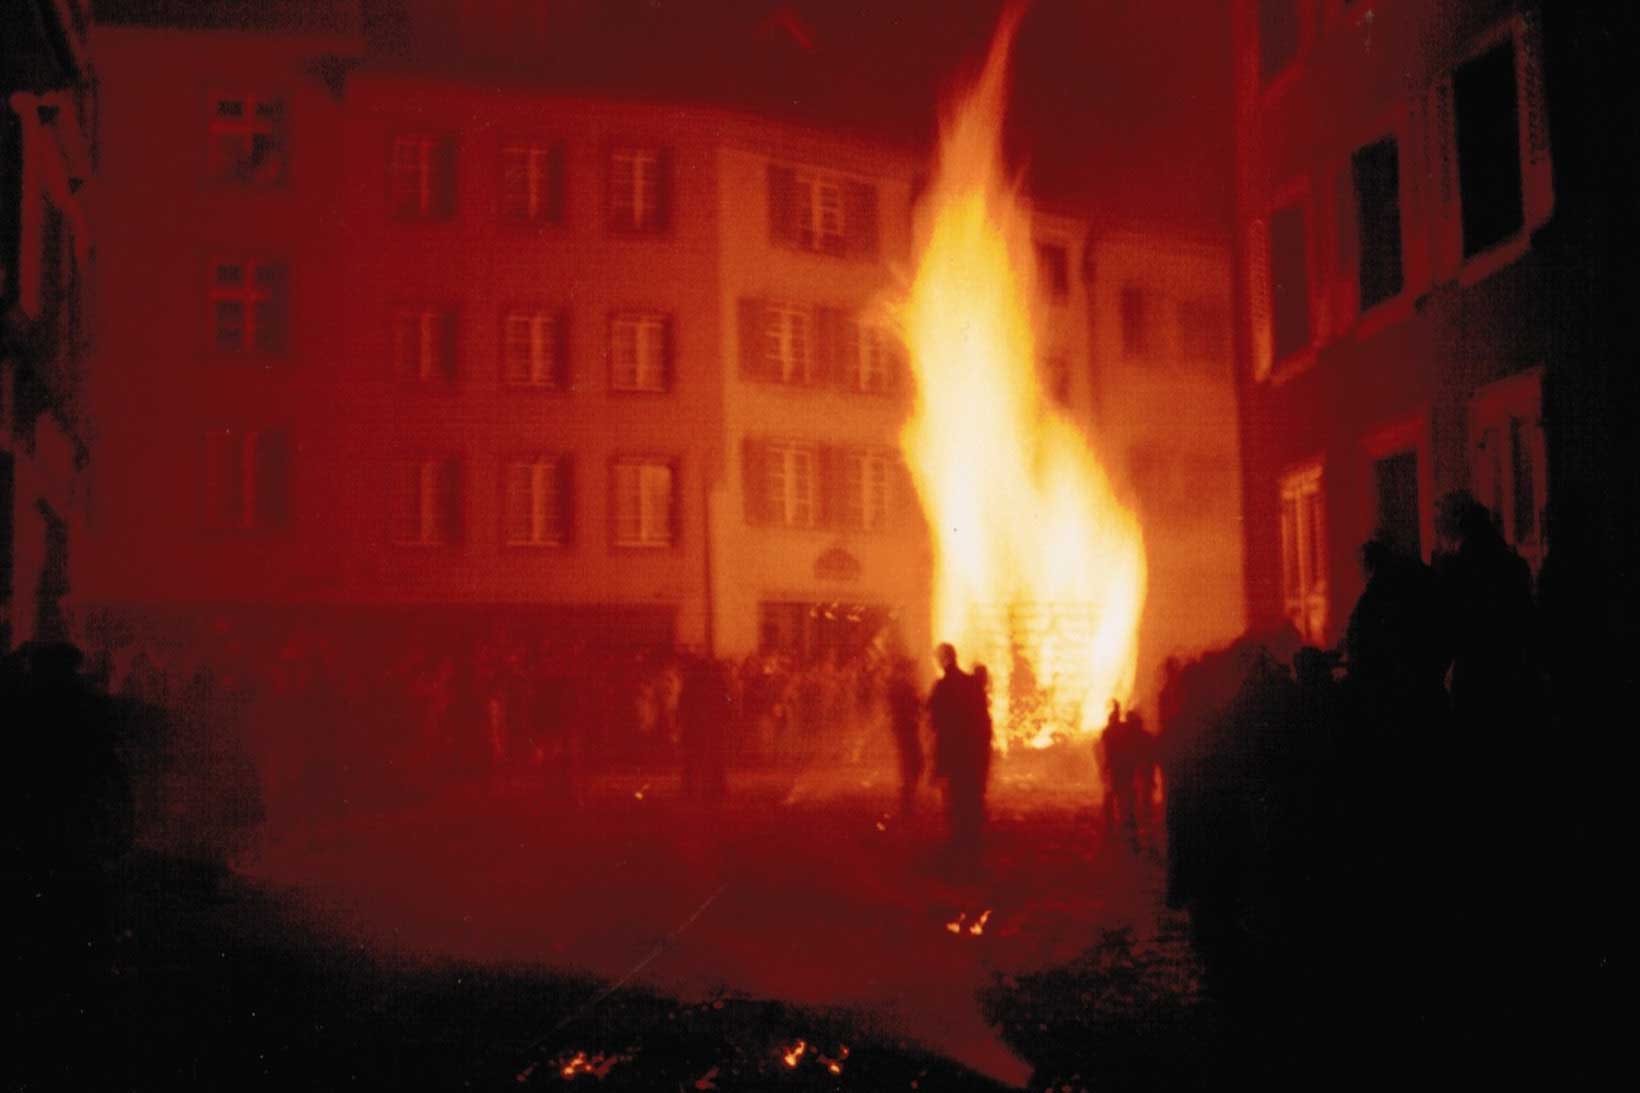 Lighting and extinguishing the large fire carts demands some experience, 2004 © Hanspeter Meyer